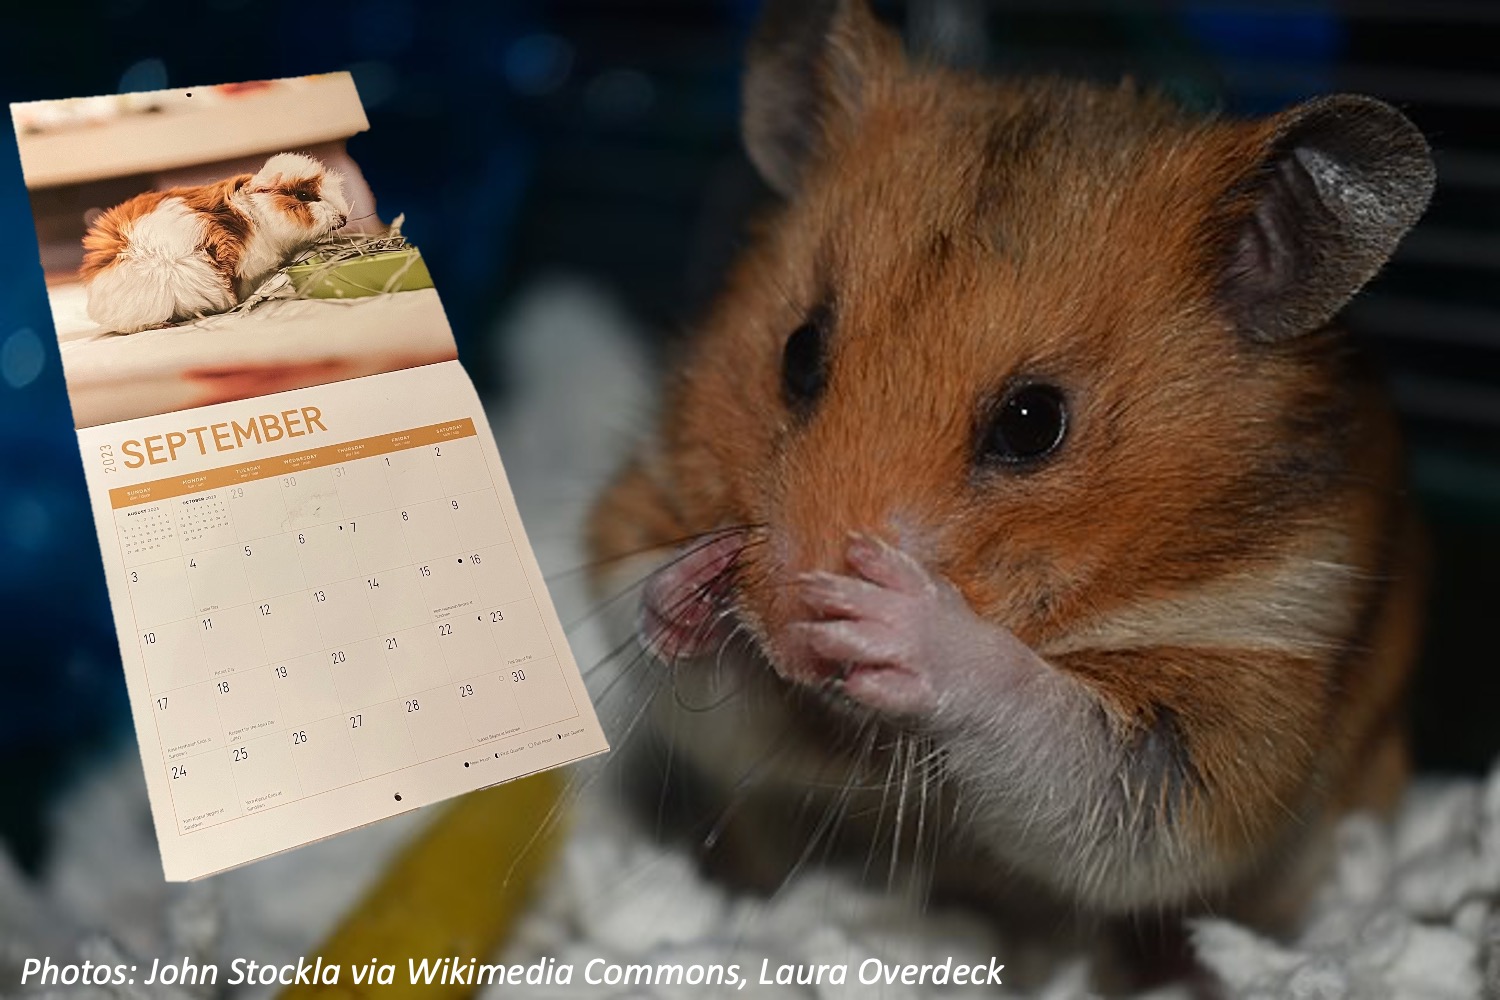 How Many Years in a Hamster Year?